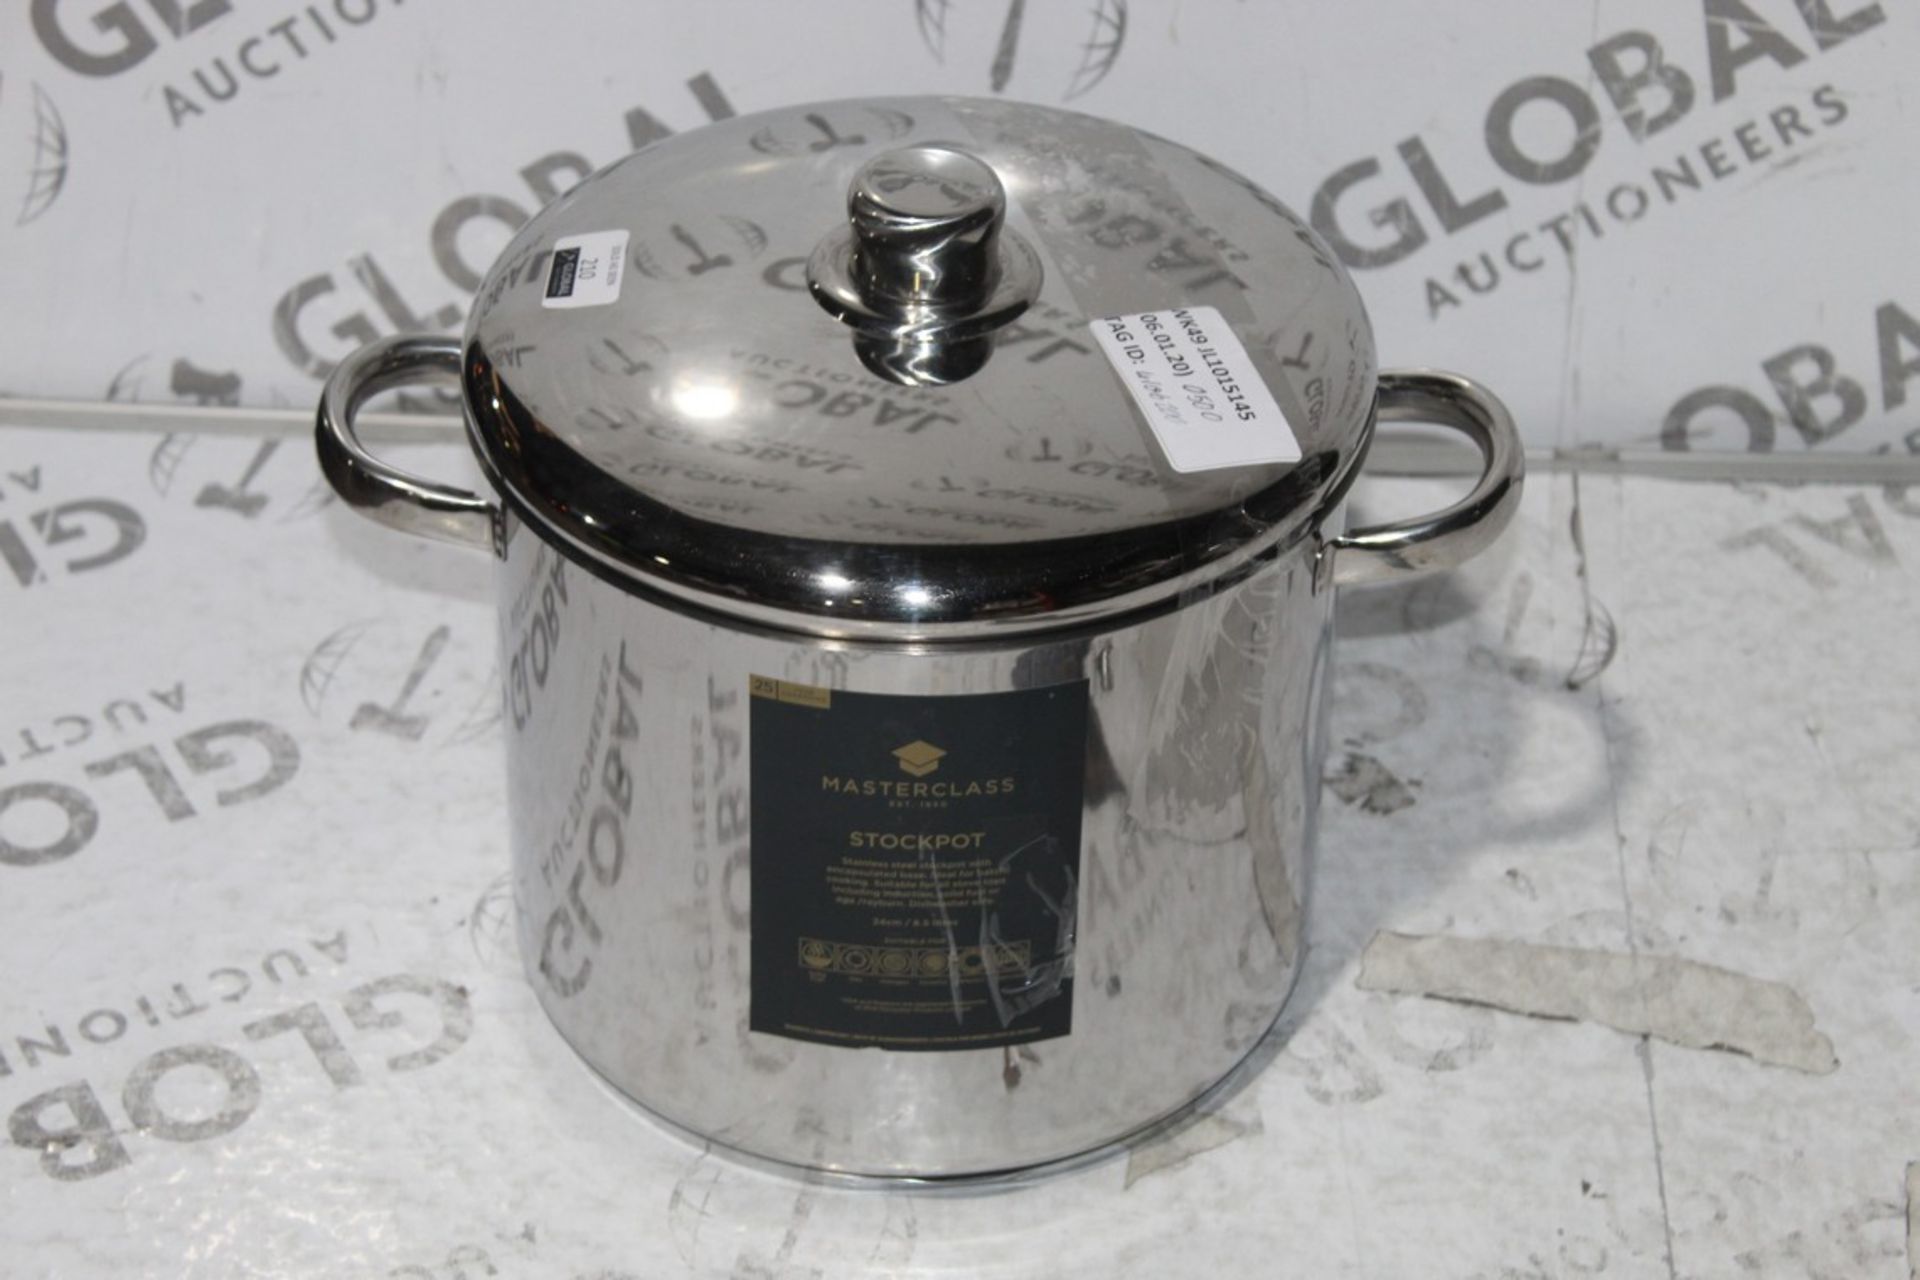 Stainless Steel Masterclass Stockpot RRP £50 (4106200) (Public Viewing and Appraisals Available)